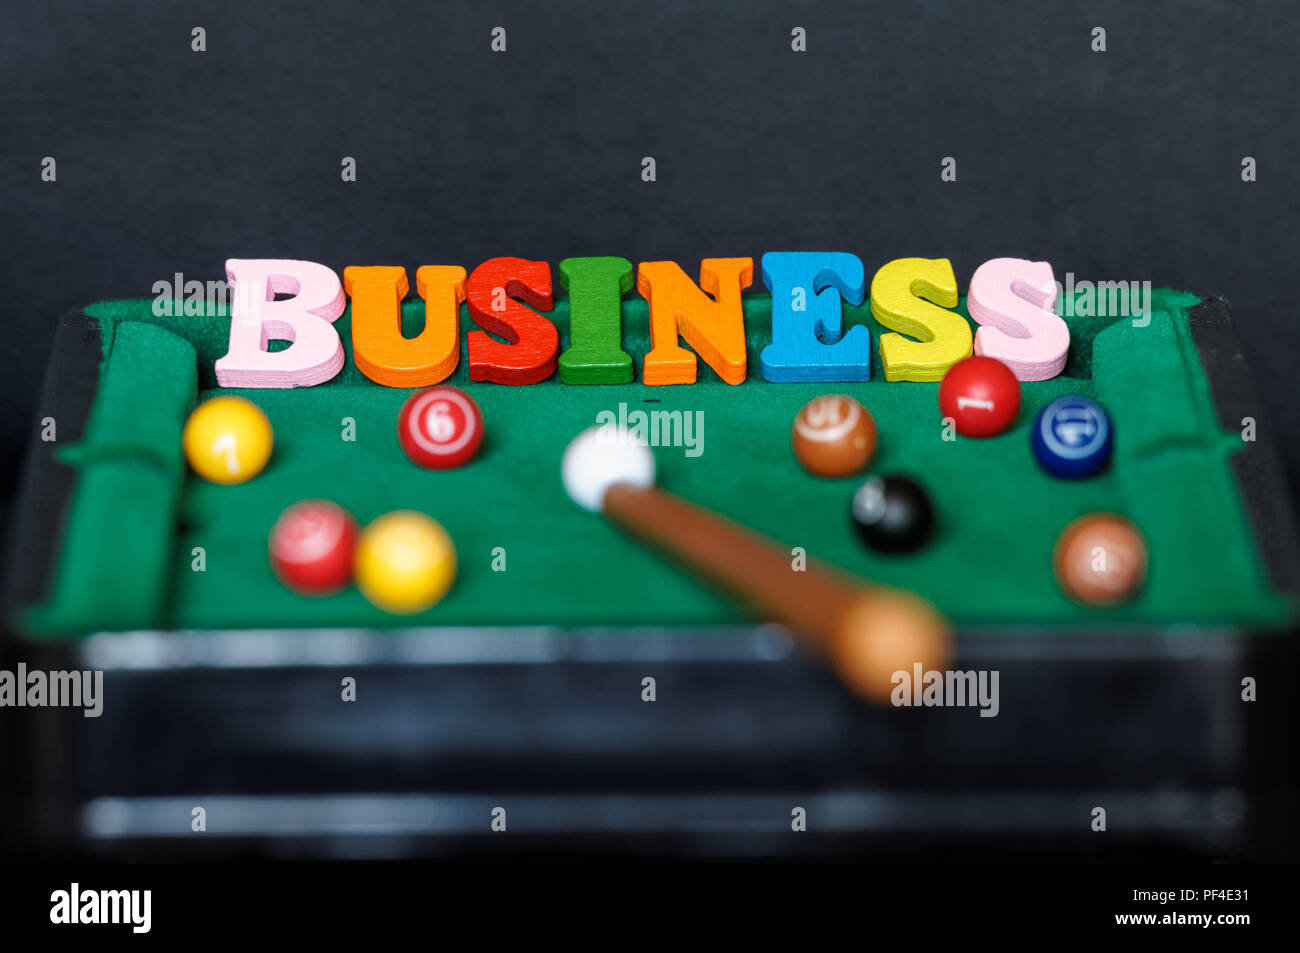 conceptual image of business success strategy Stock Photo